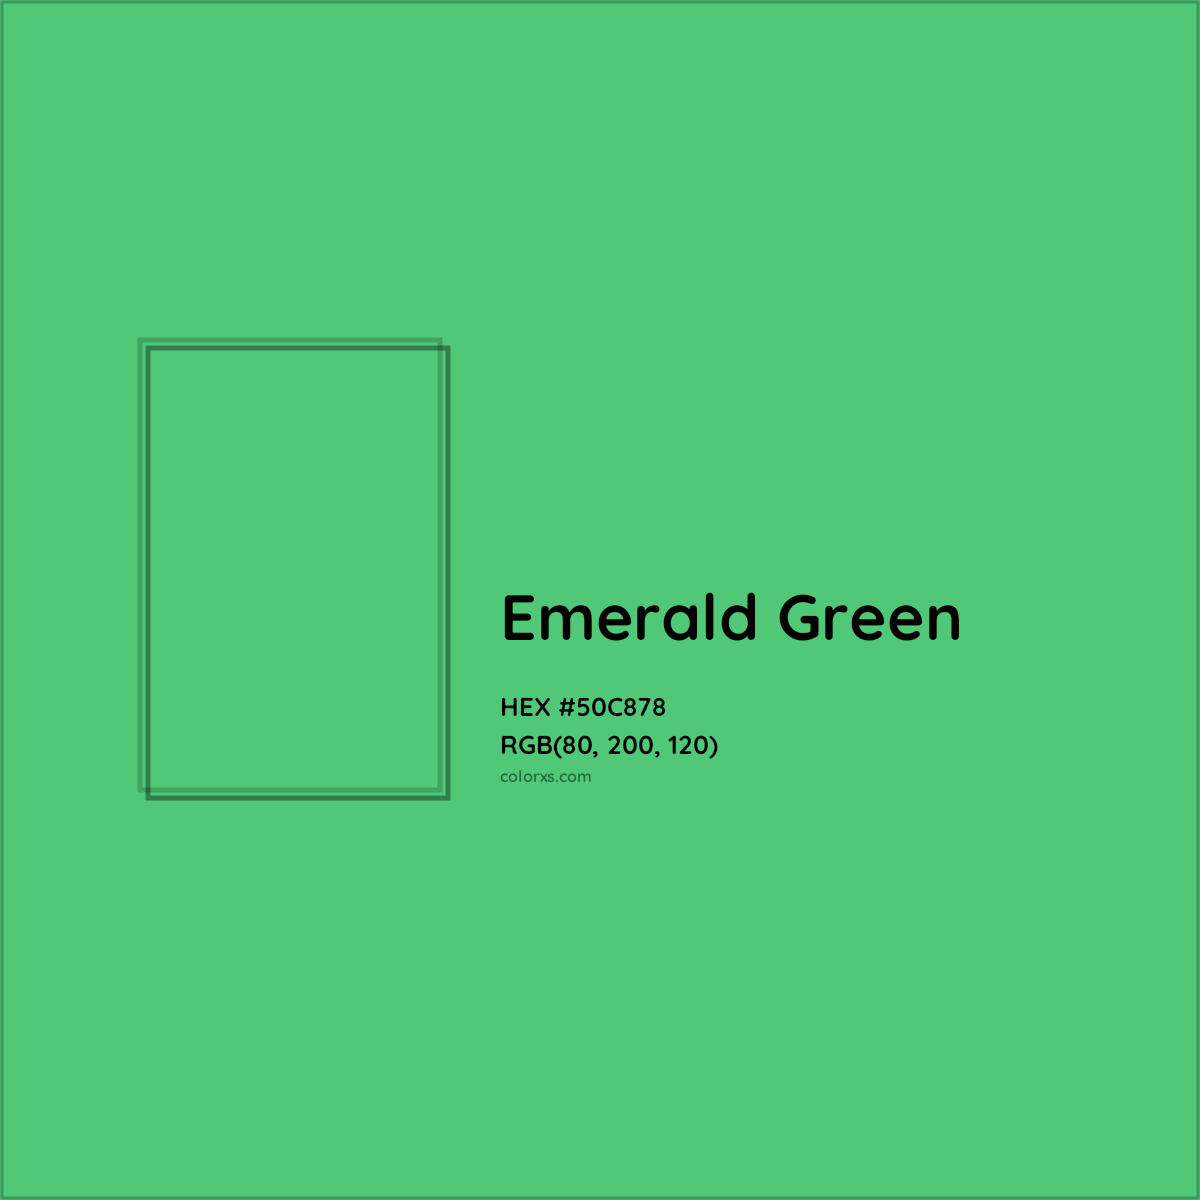 About Emerald Green - Color meaning, codes, similar colors and